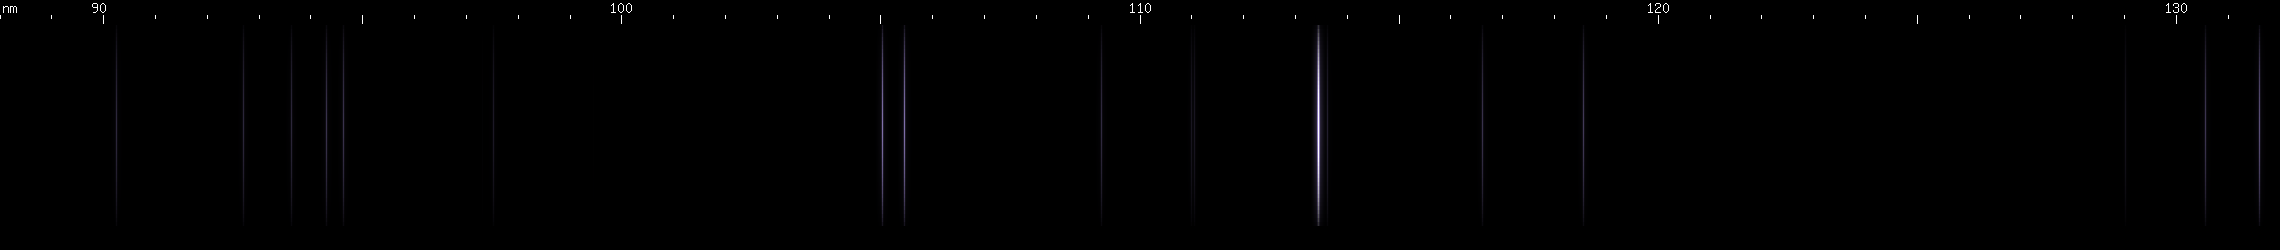 Spectral lines of Ytterbium.